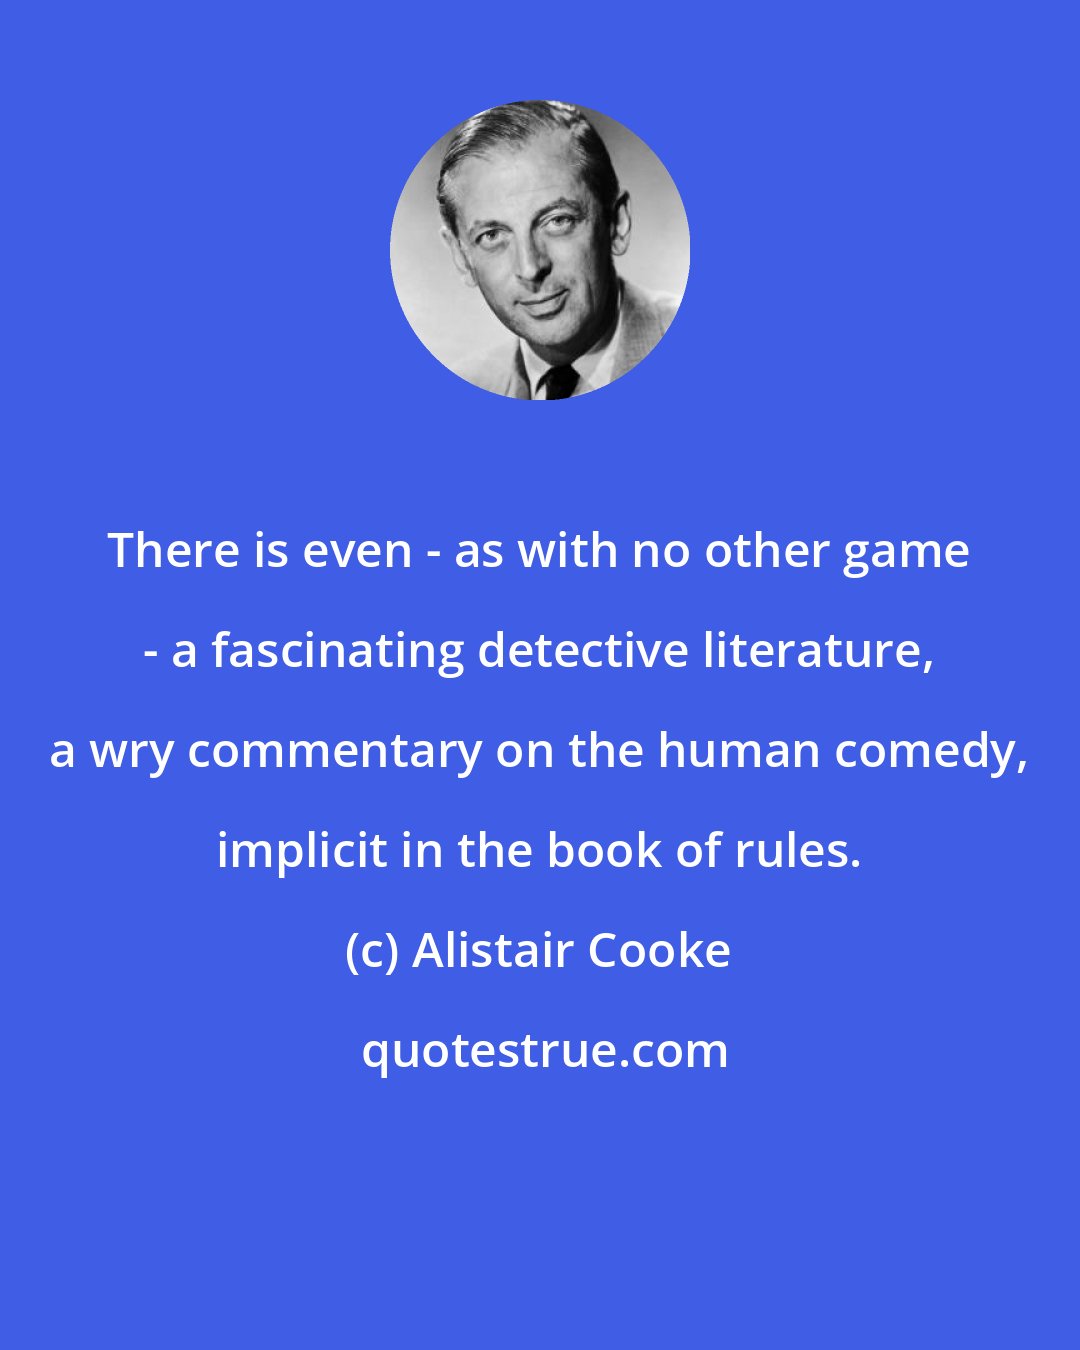 Alistair Cooke: There is even - as with no other game - a fascinating detective literature, a wry commentary on the human comedy, implicit in the book of rules.